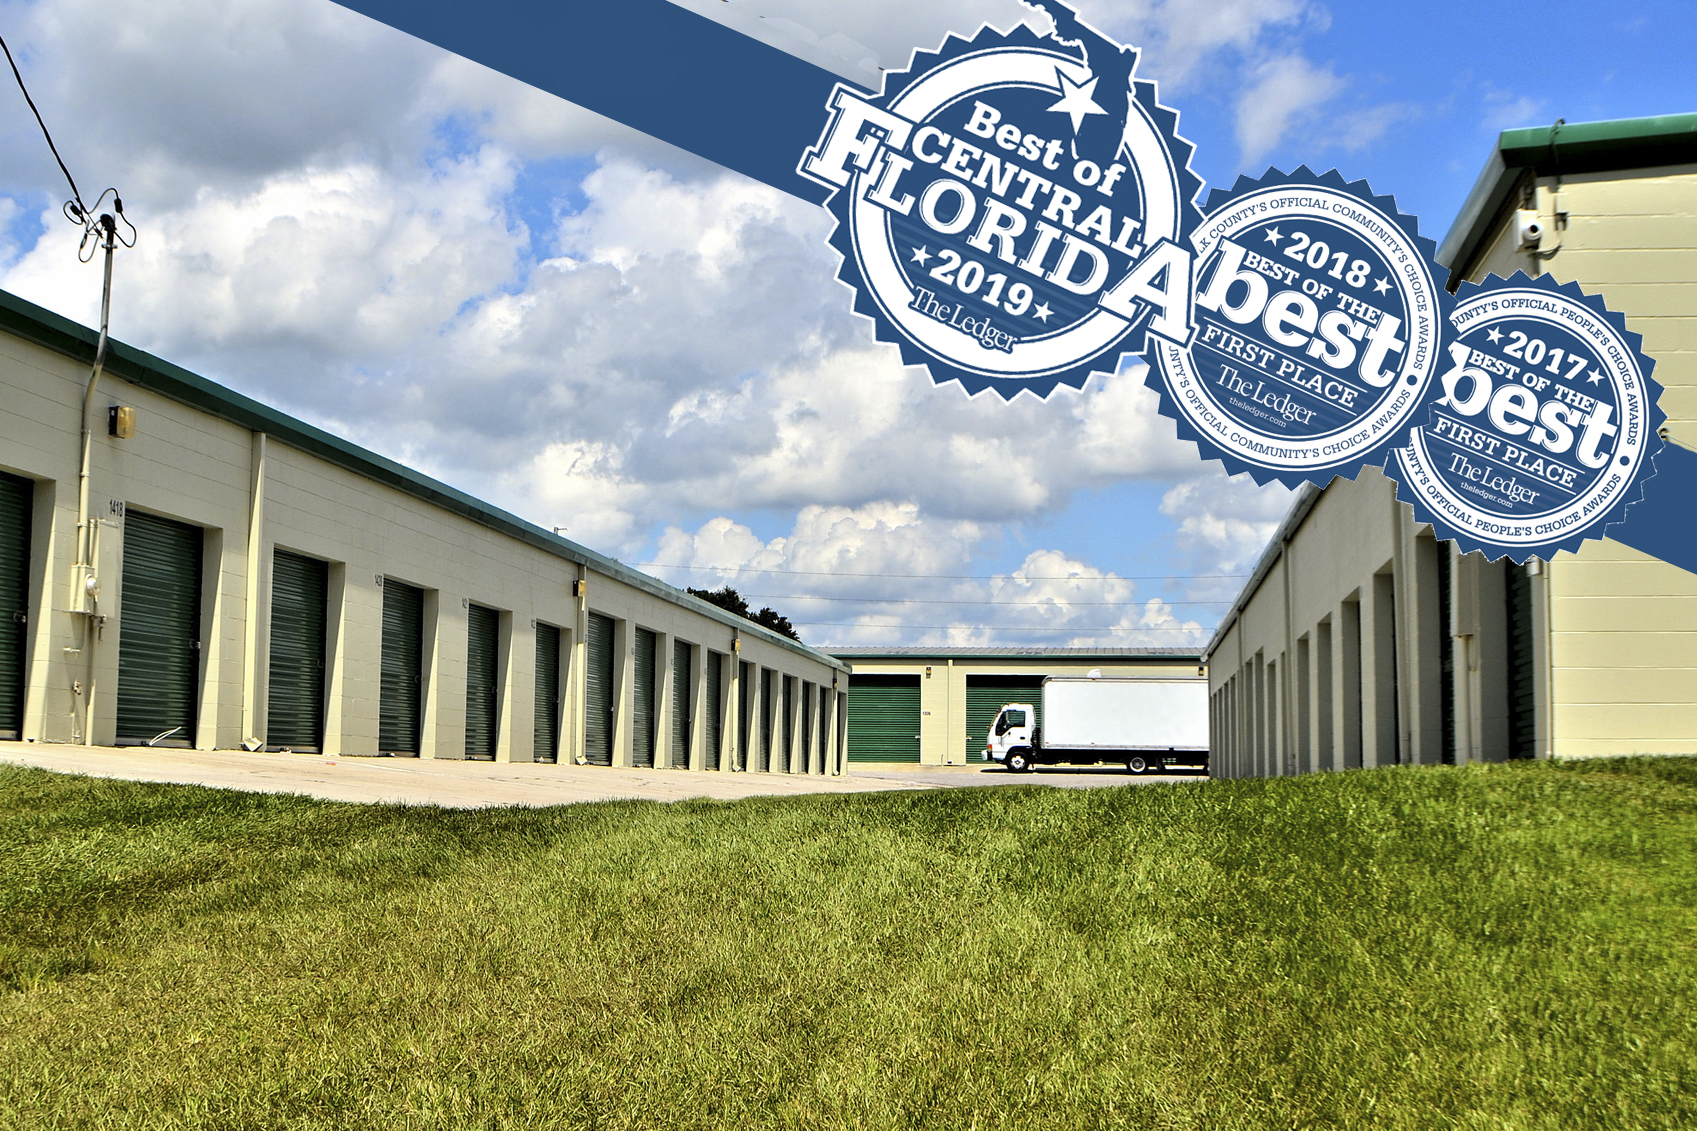 8 Excellent Qualities of a Good Storage Facility